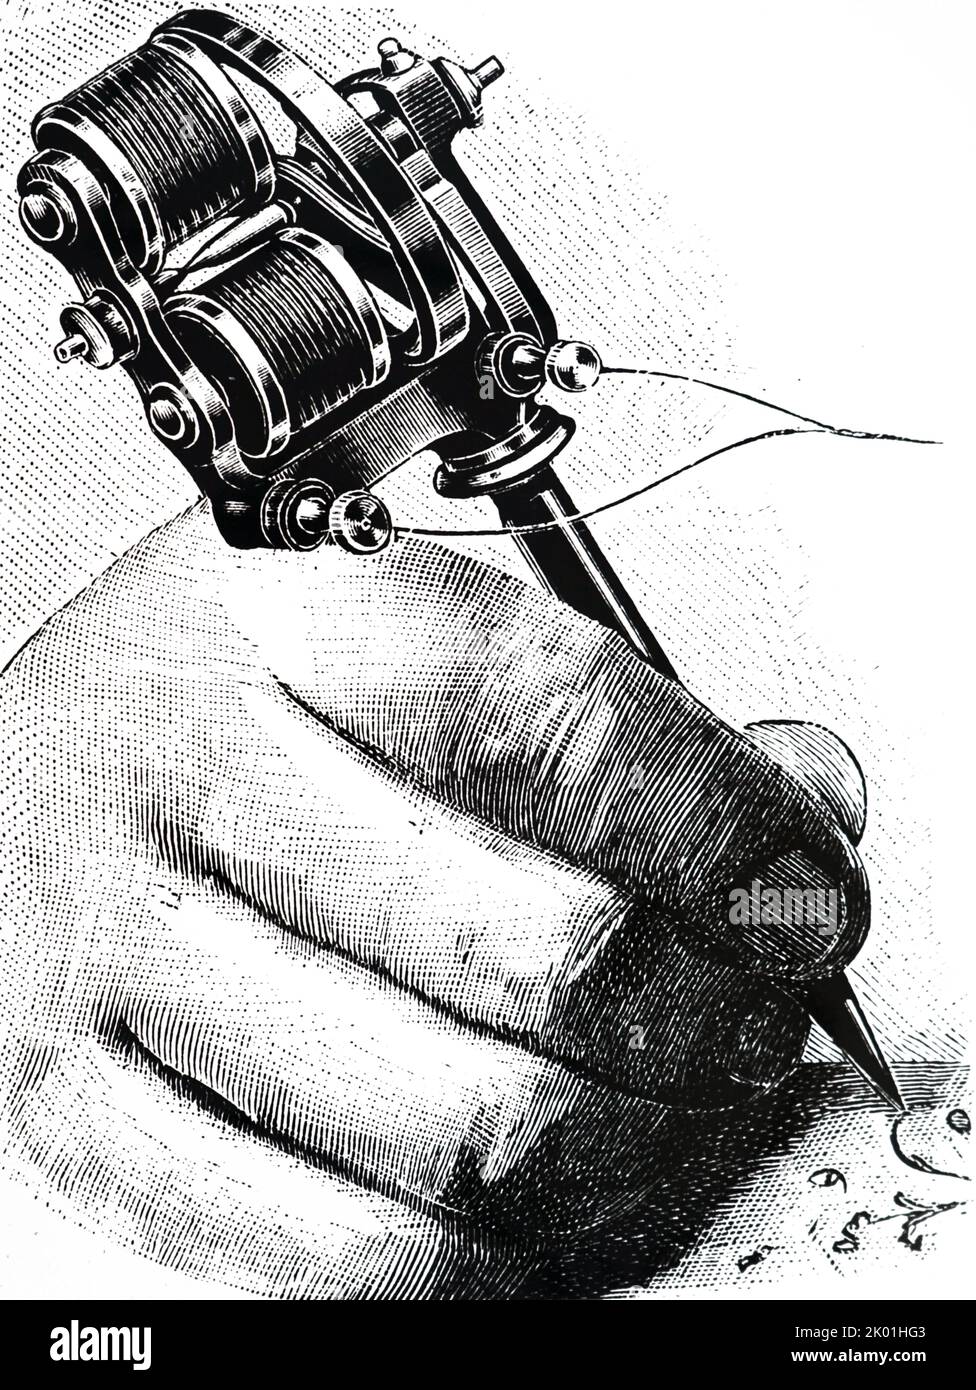 Electric tattooing pen by Max O'Reilly of New York. From La Nature, Paris, 1904. Stock Photo